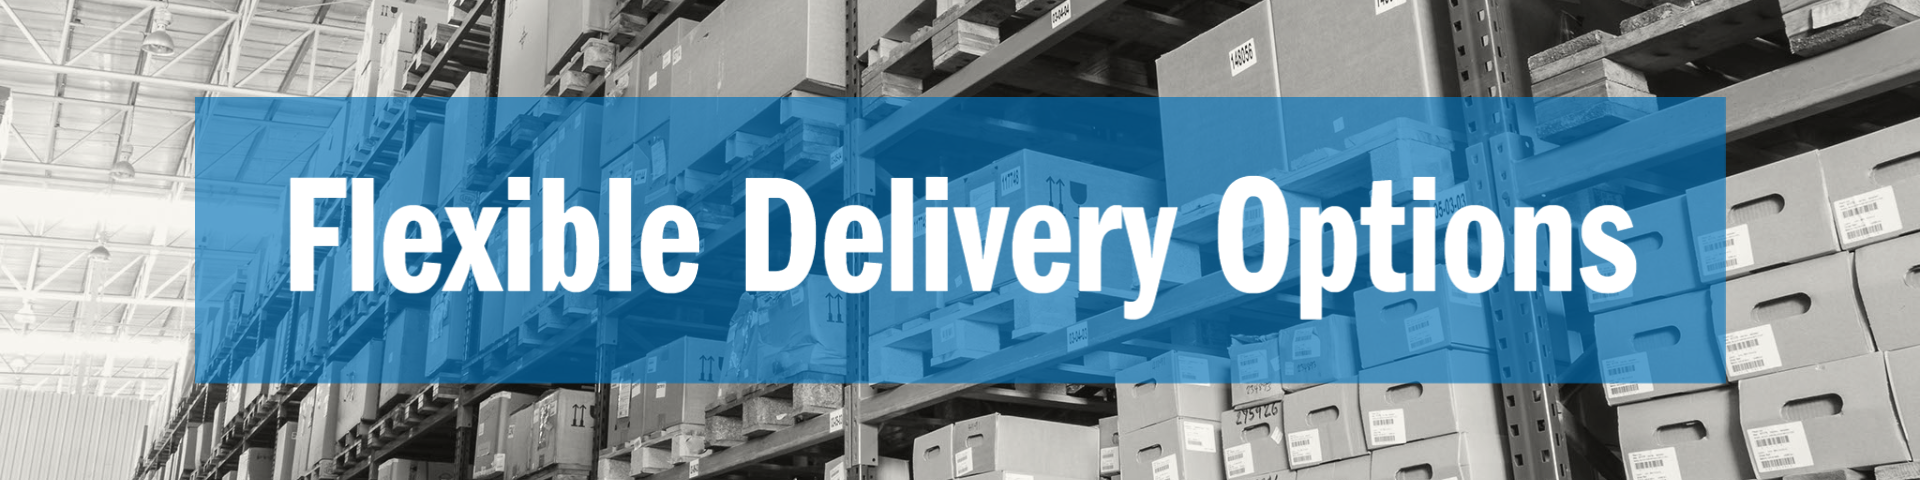 Flexible Delivery Options